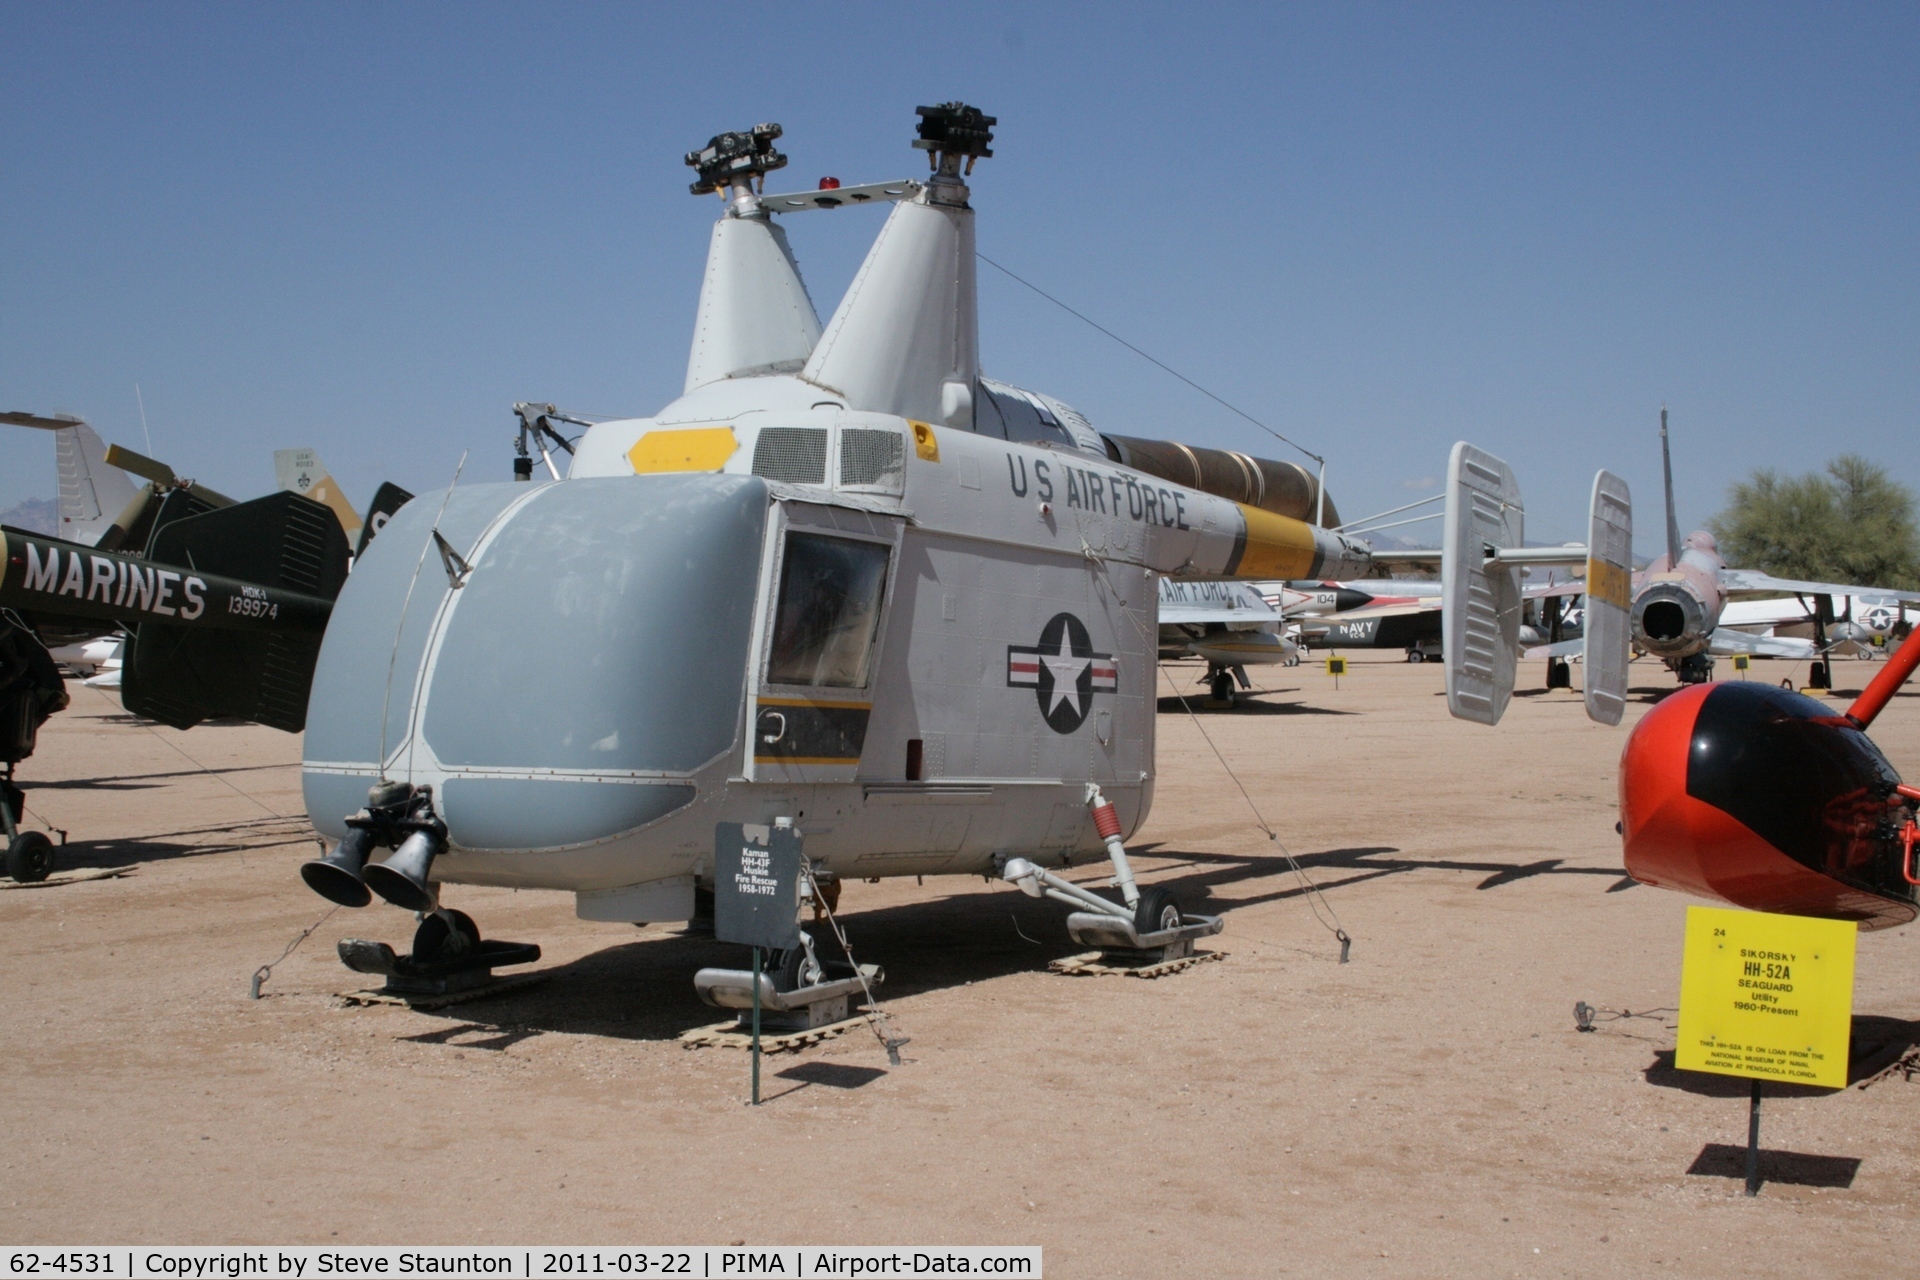 62-4531, 1962 Kaman HH-43F Huskie C/N 157, Taken at Pima Air and Space Museum, in March 2011 whilst on an Aeroprint Aviation tour